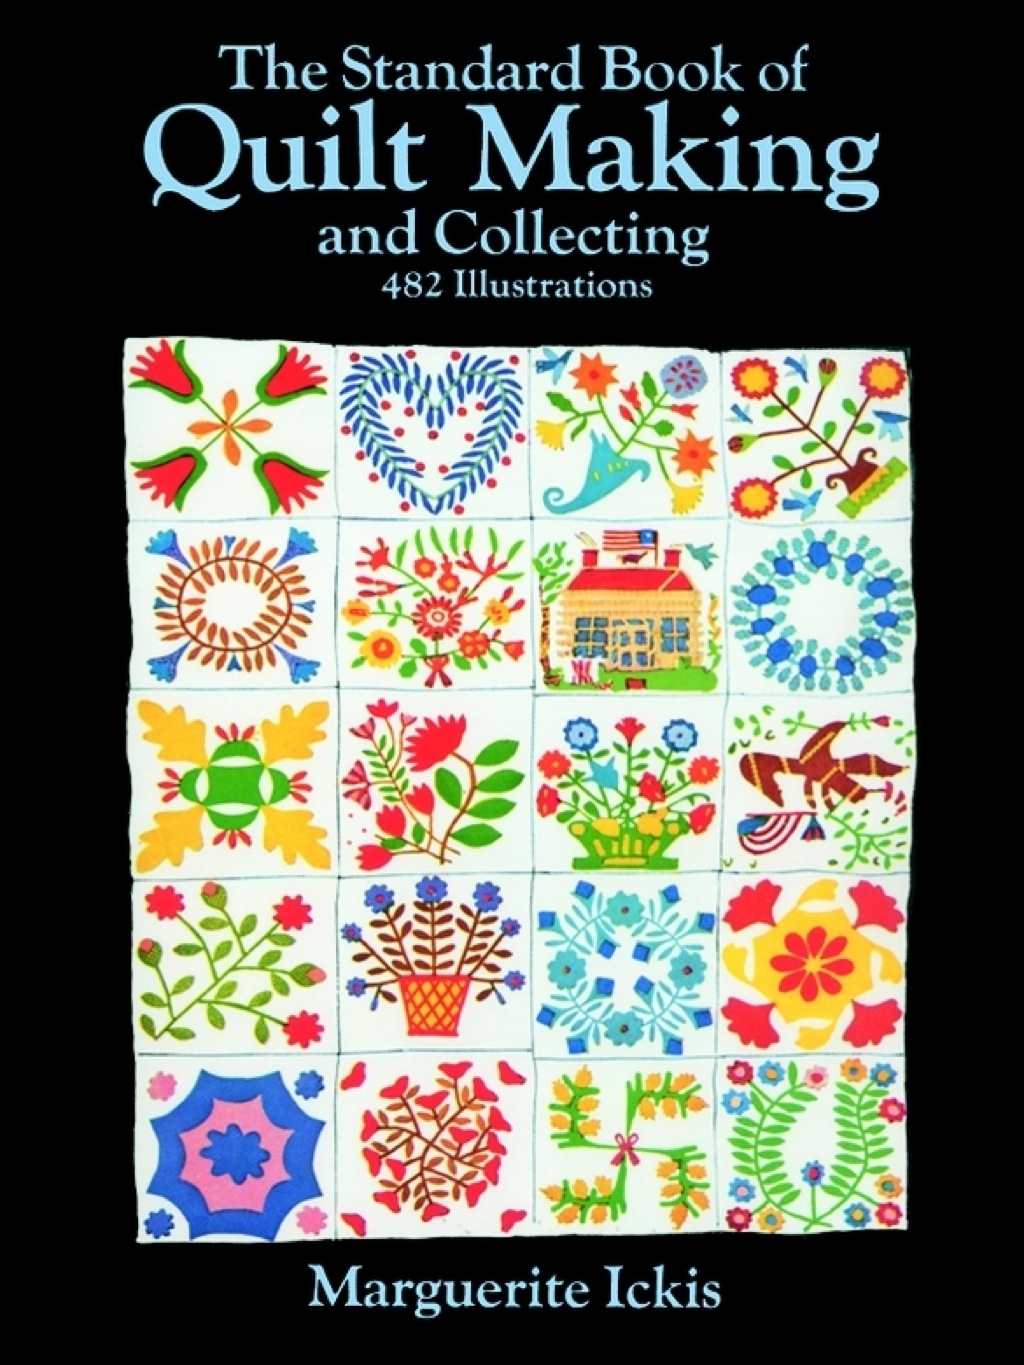 The Standard Book of Quilt Making and Collecting (eBook) - Marguerite Ickis,